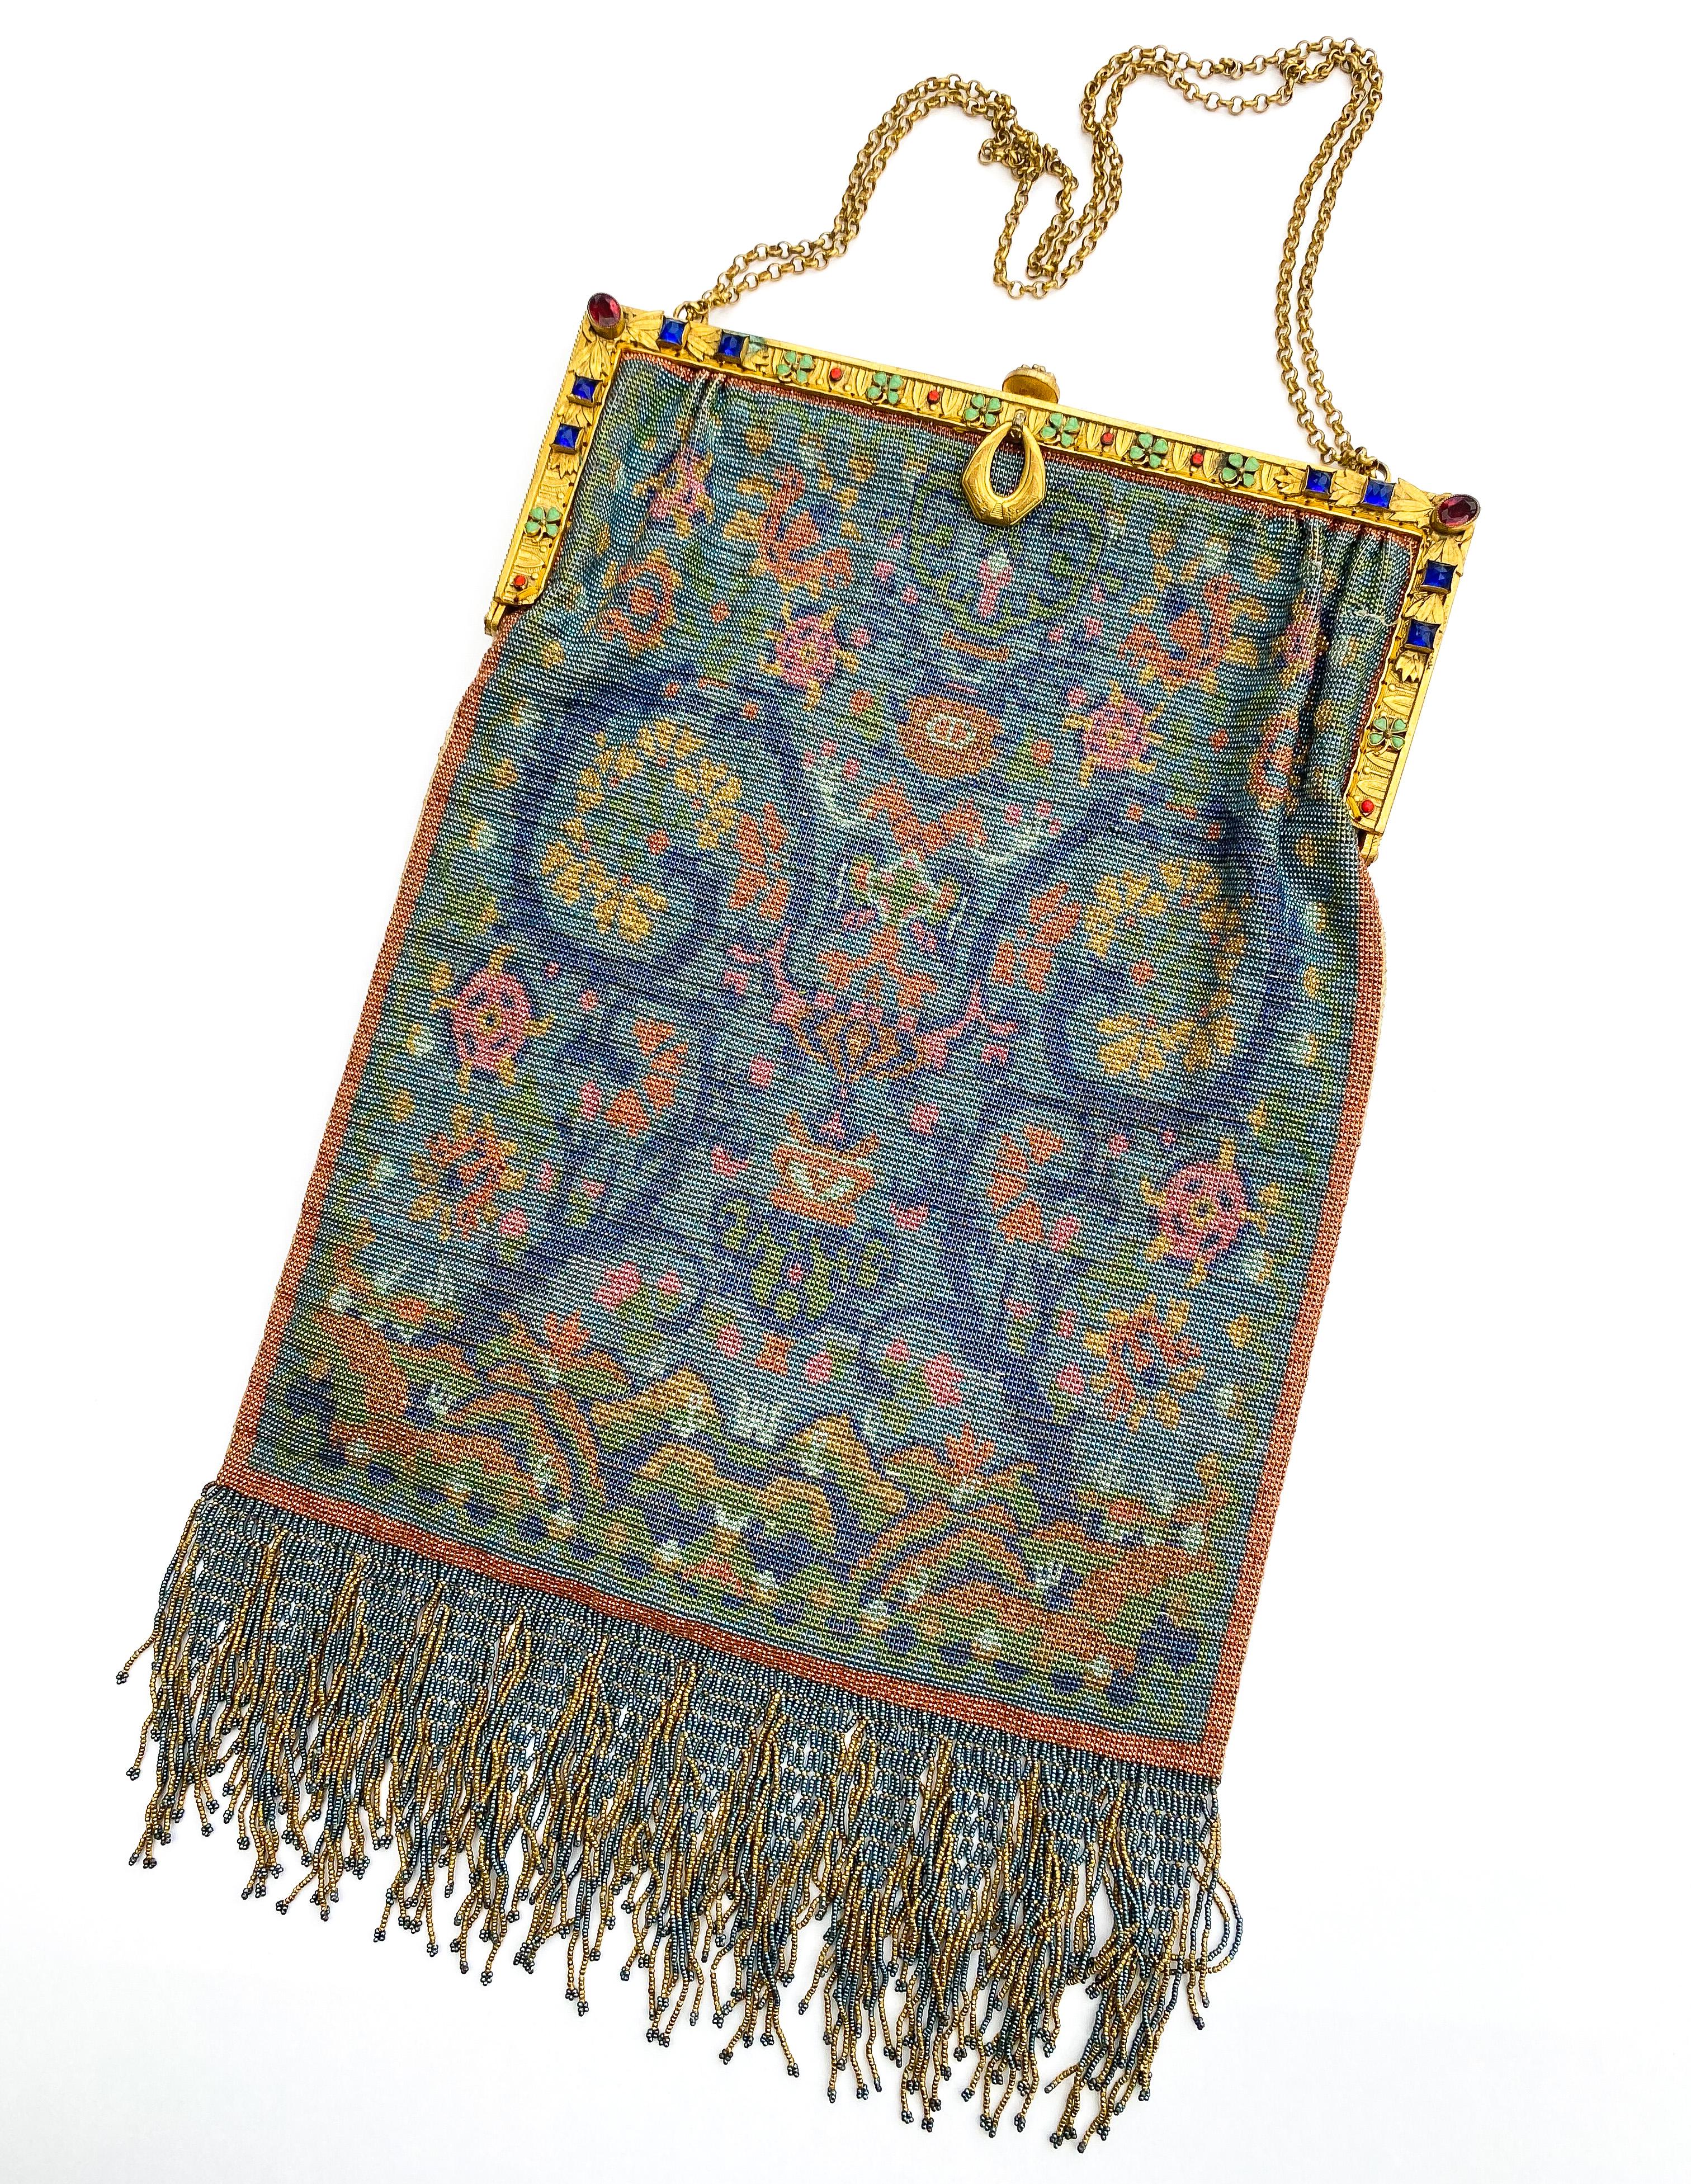 A very fine and detailed large micro beaded bag, with exquisite detail and nuanced colouring, still fresh and intact. Gently gleaming with a sumptuous array of colours, the bag has a gilt metal frame, adorned with coloured pastes and enamelled four